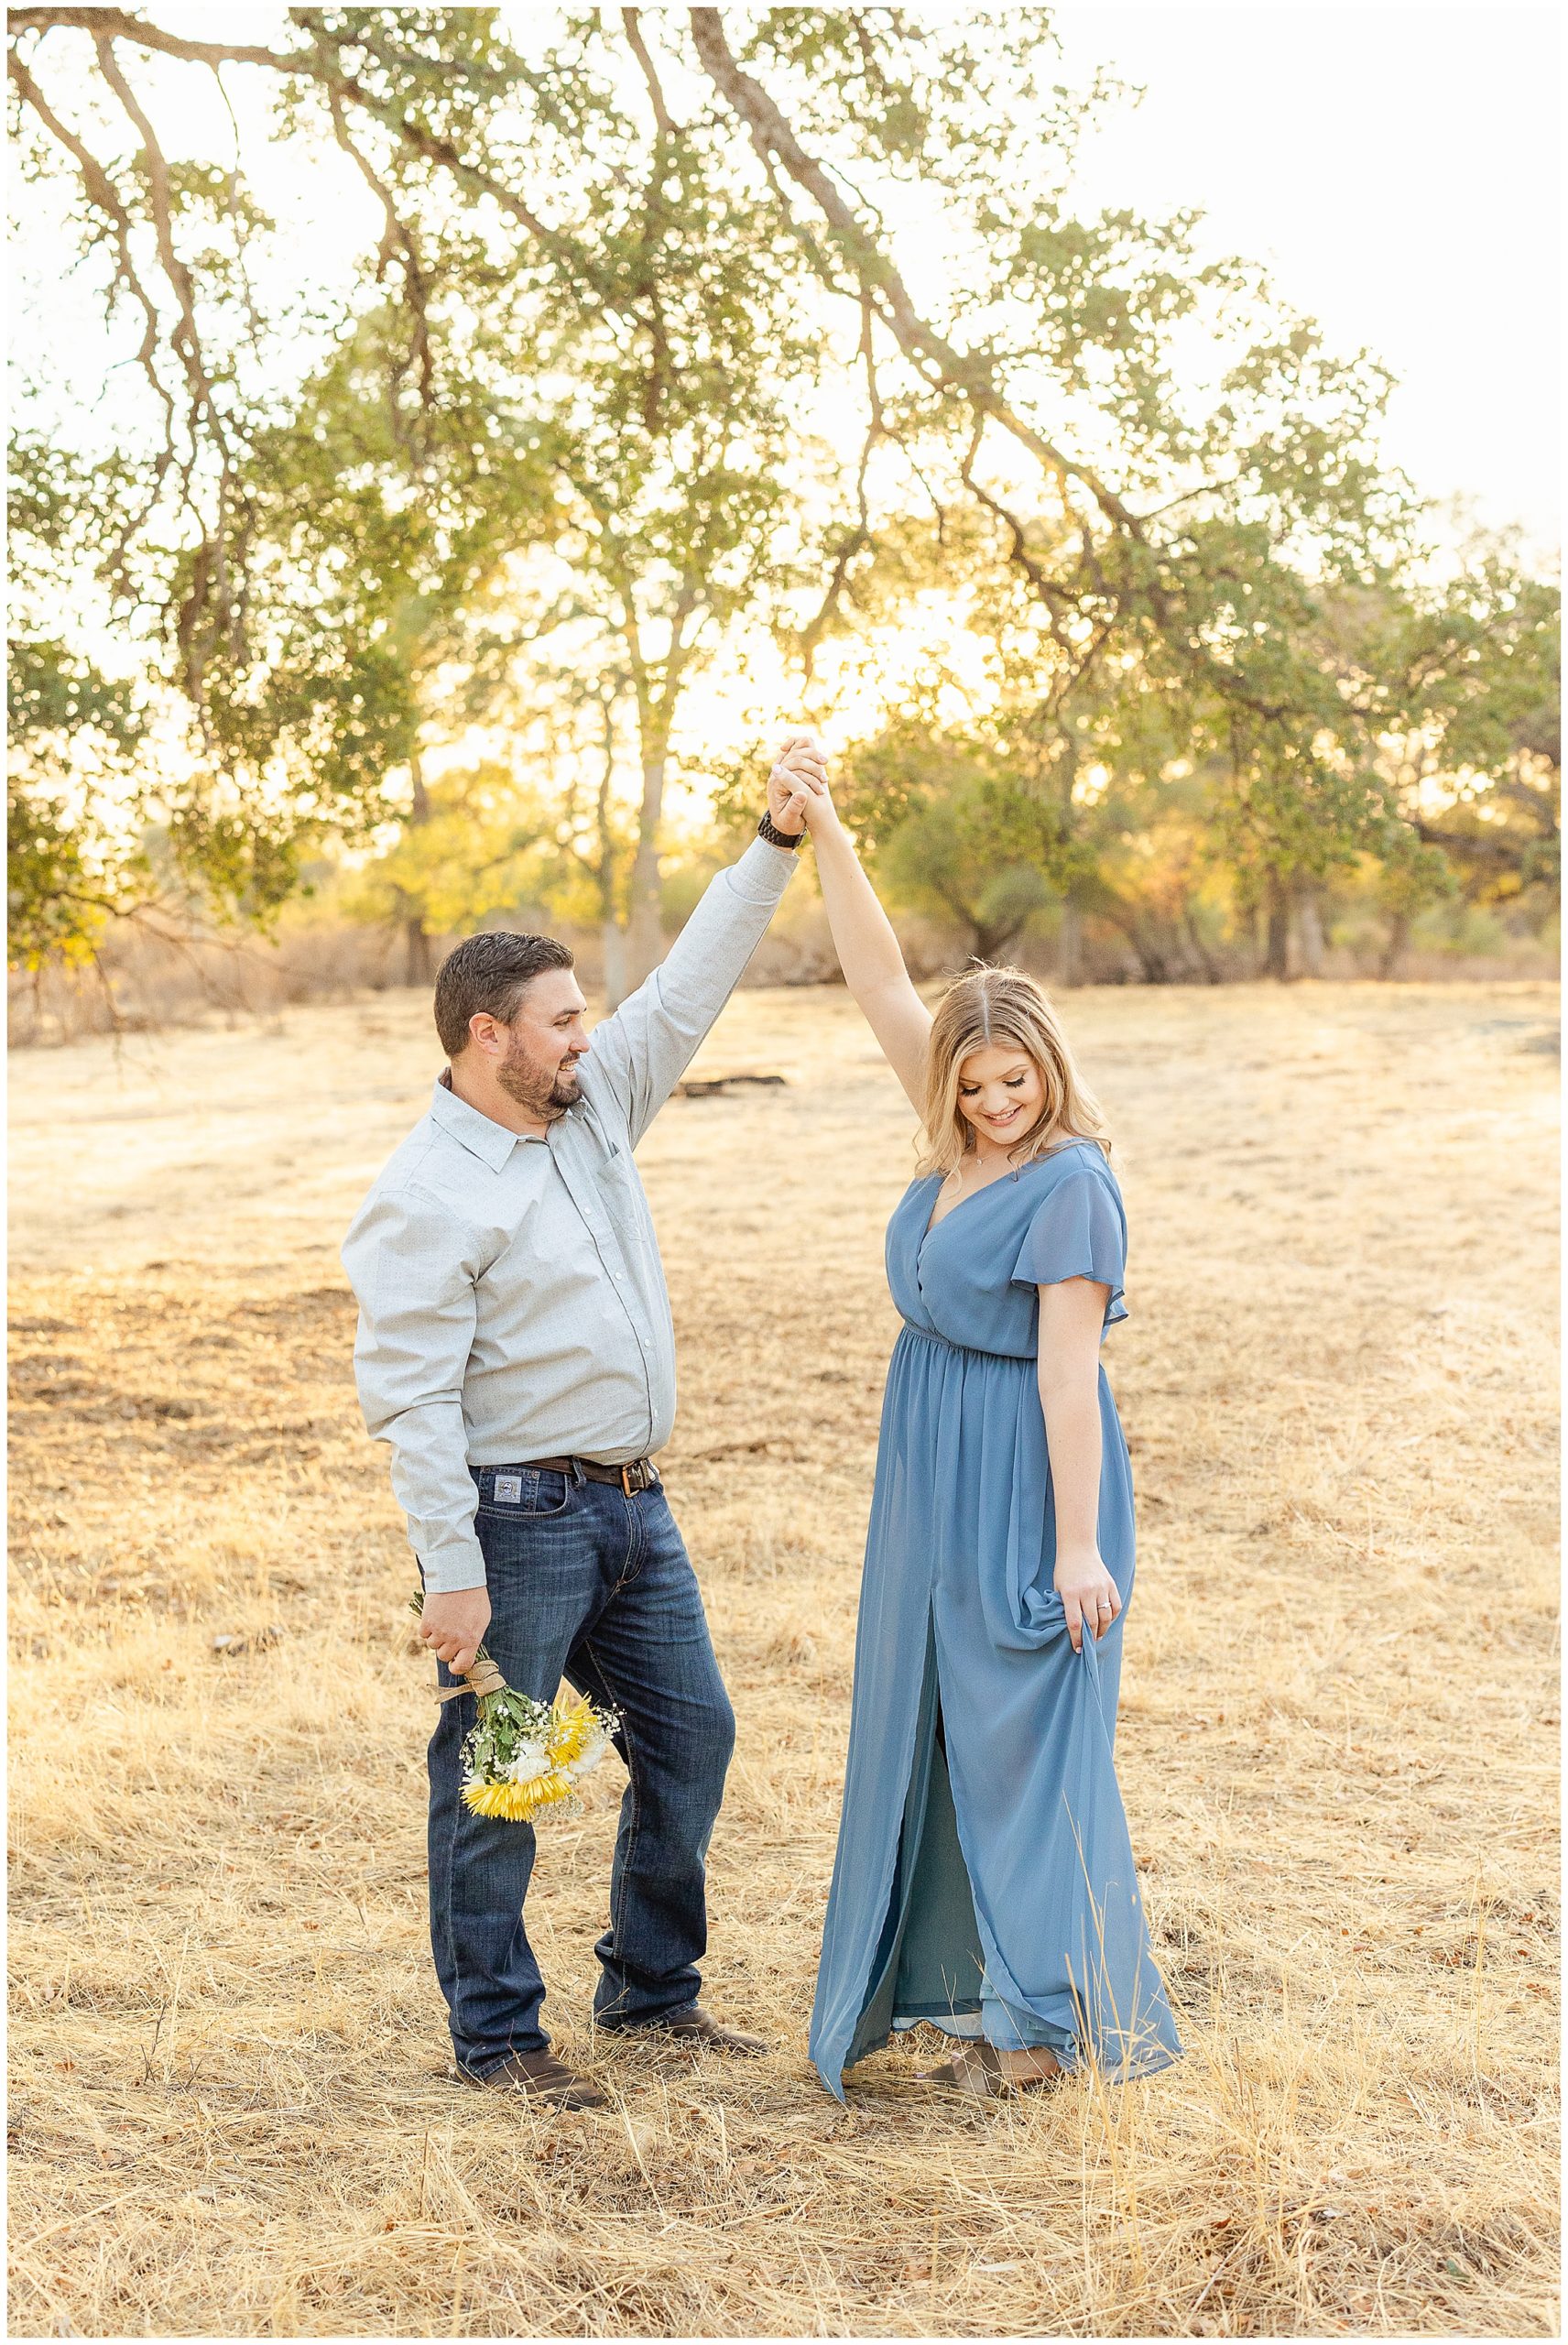 Upper Bidwell Park Engagement Session Chico CA Trail Fall September Yellow Flowers_0020.jpg